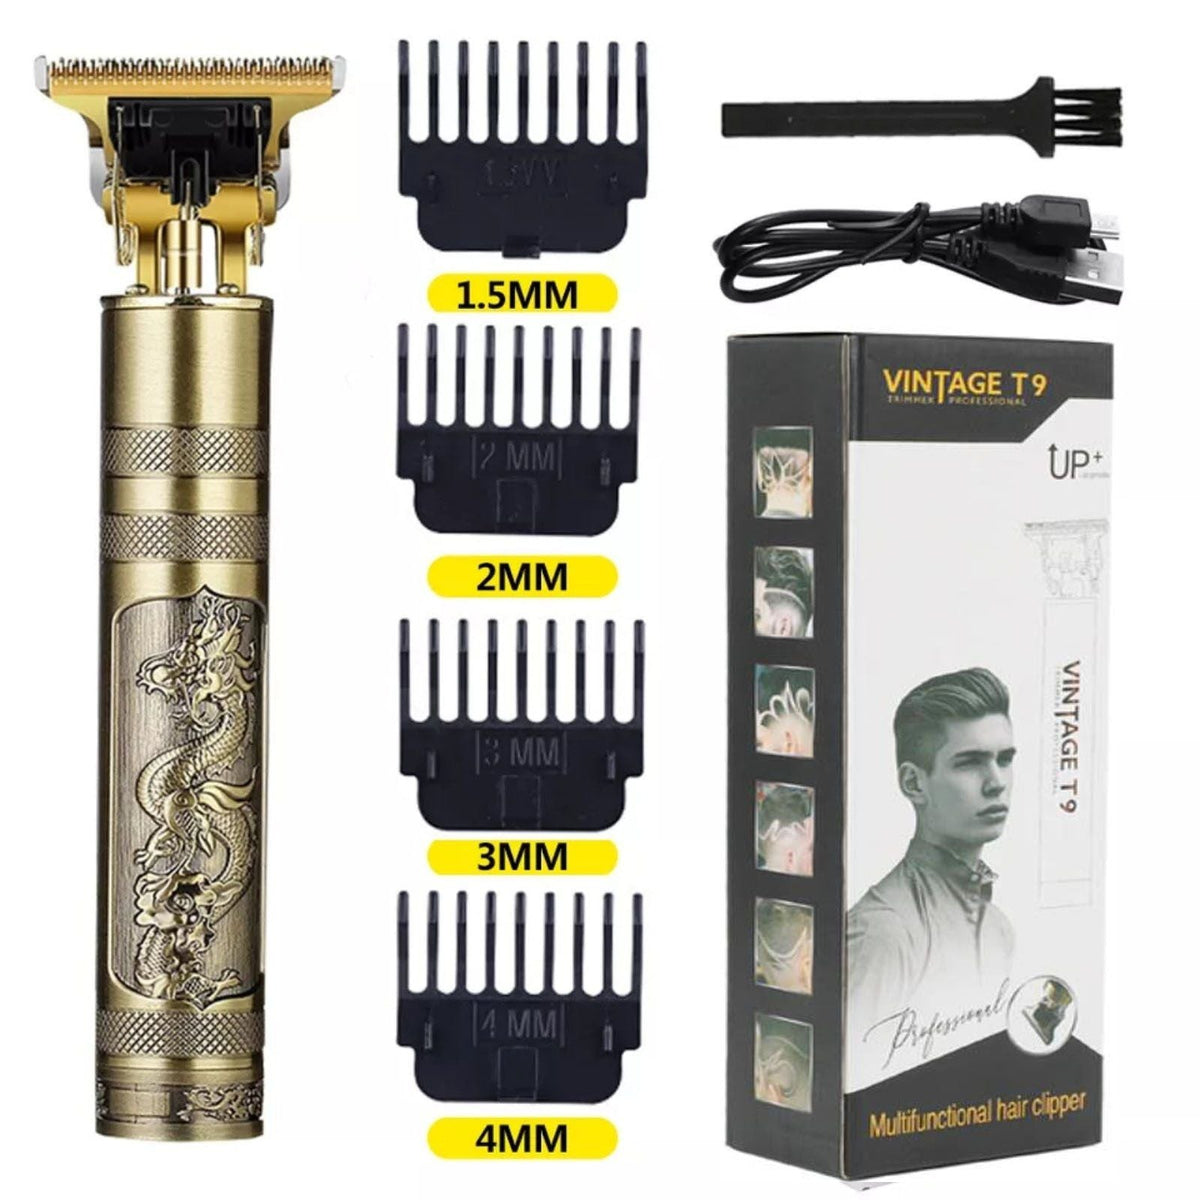 VINTAGE T9 Dragon Style Metal Rechargeable Electric Hair Clipper